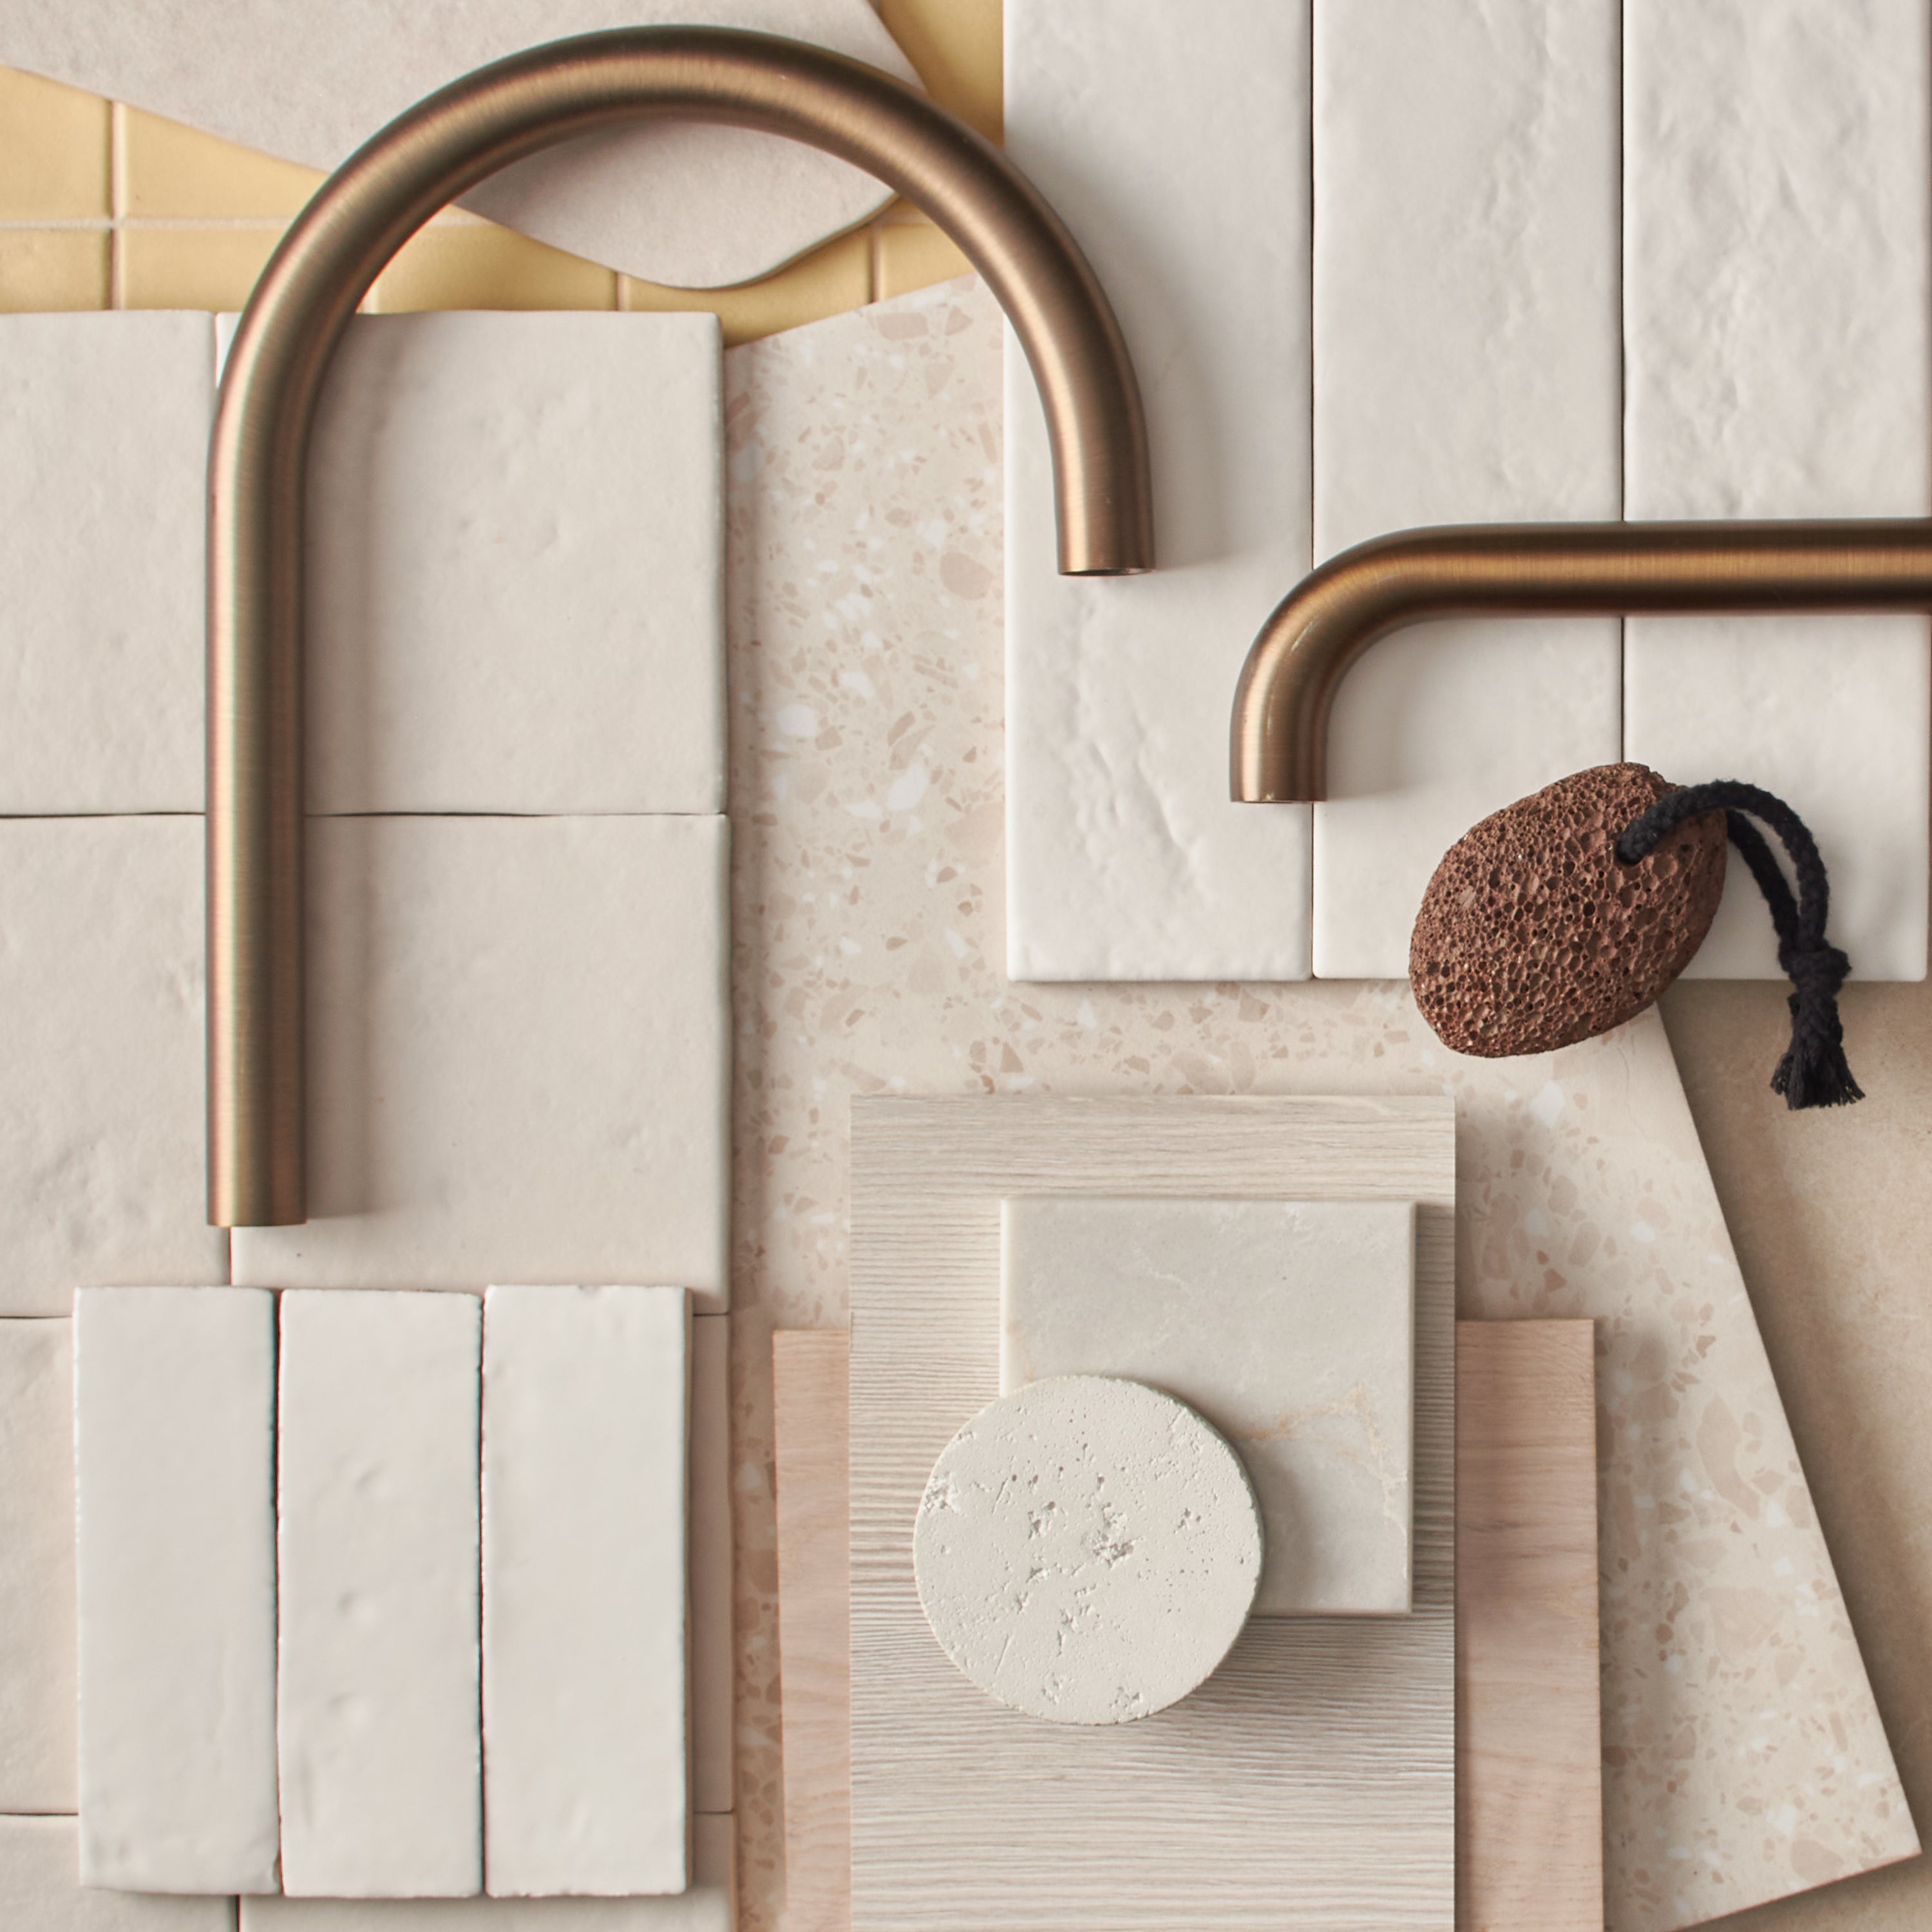 6 Things To Consider Before Buying Tiles